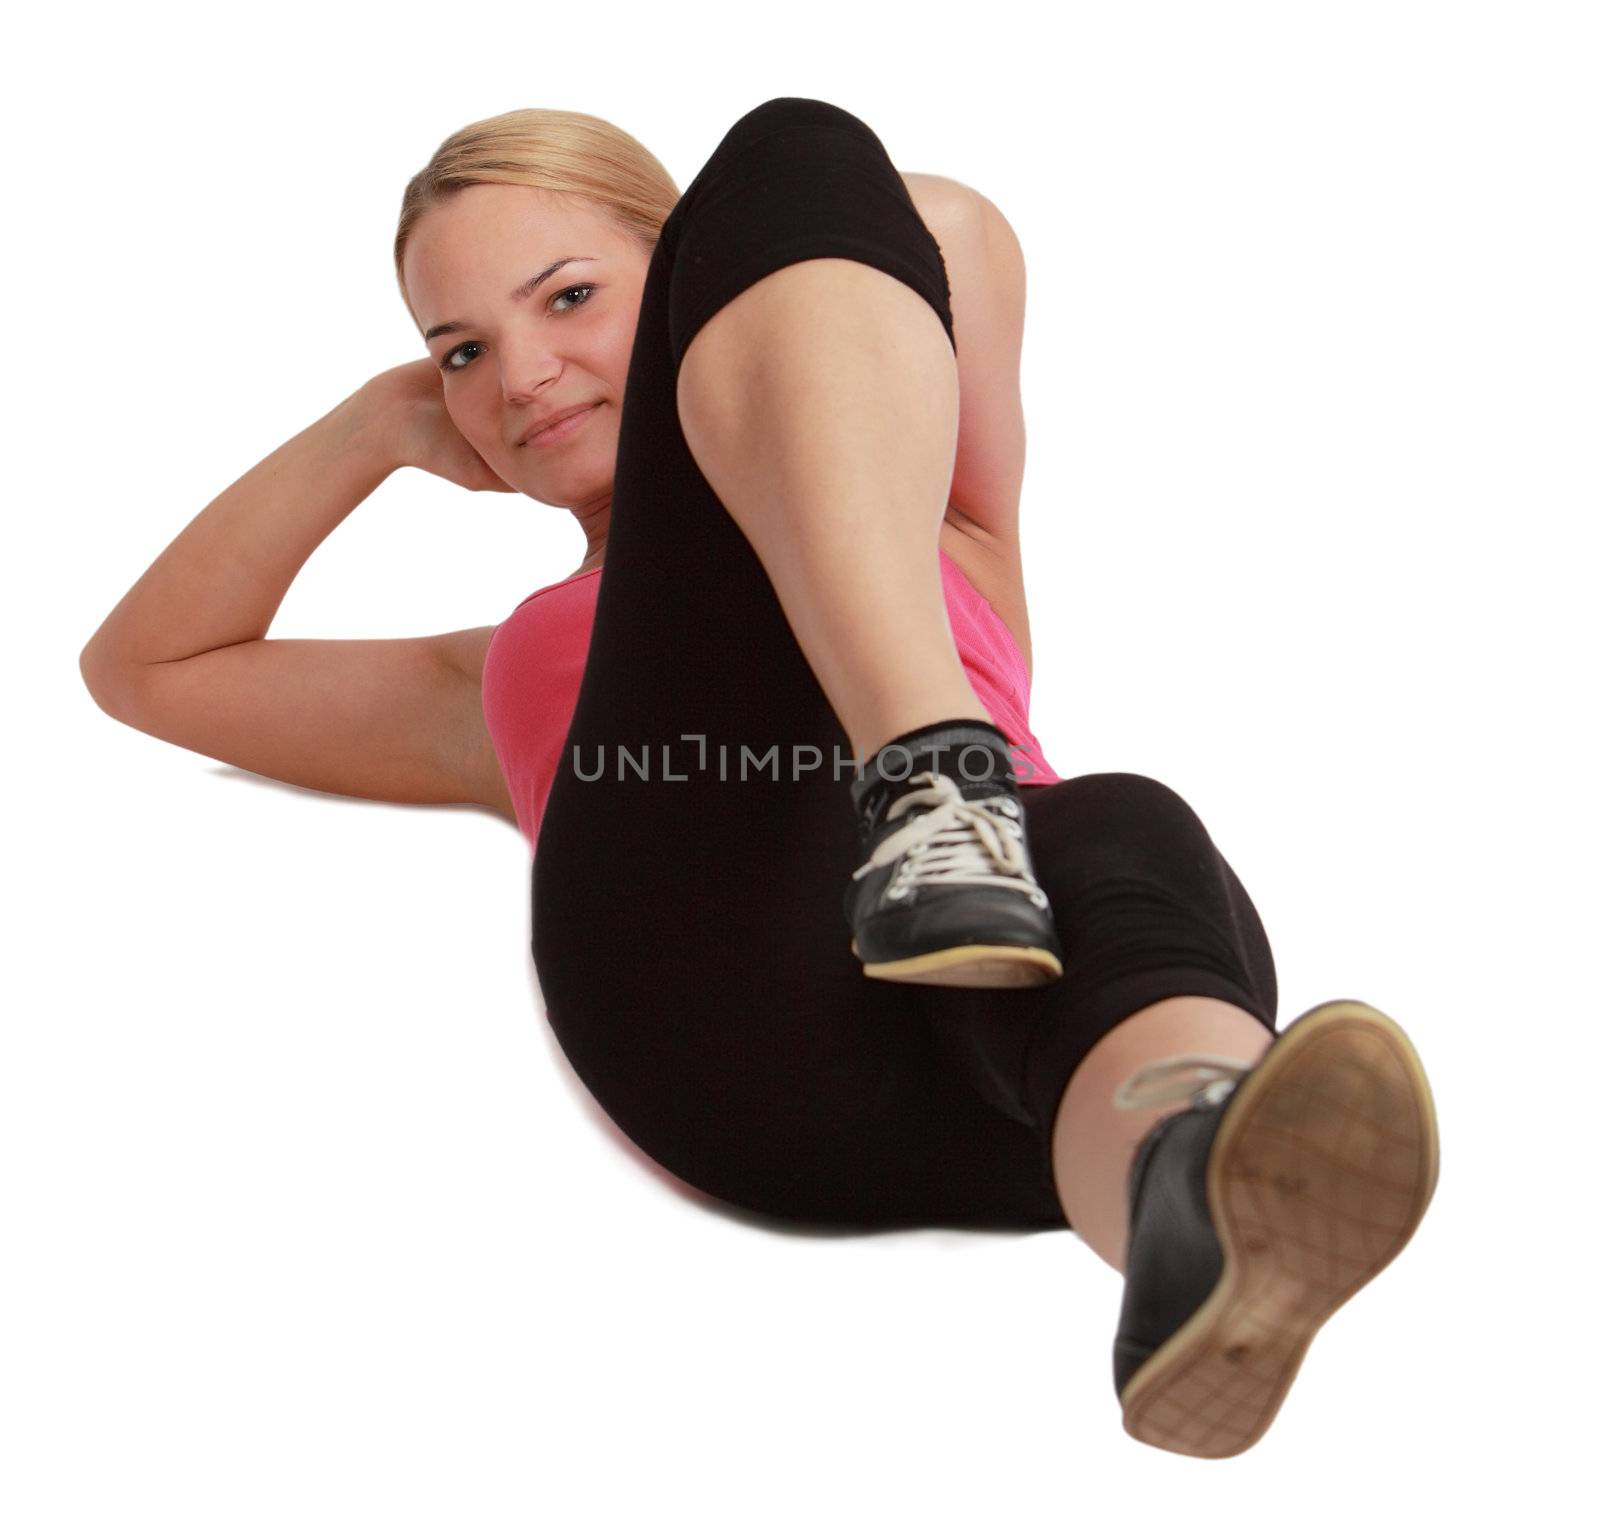 Woman doing sit-ups, isolated against a white background.